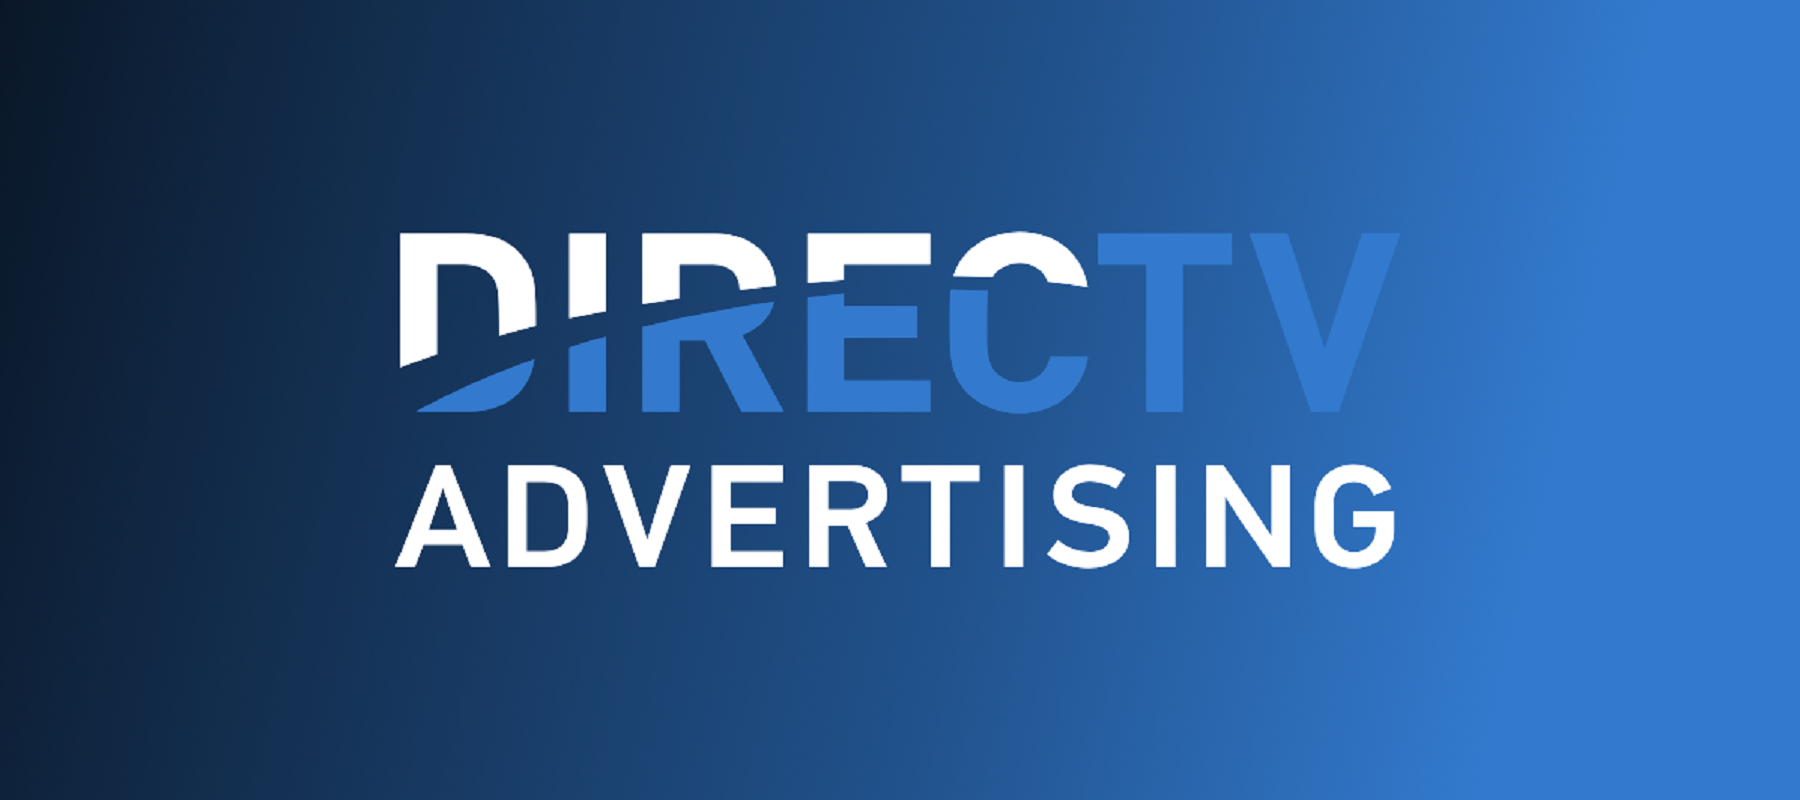 DIRECTV Advertising partners with FourthWall to revolutionize cross-screen, data-driven targeting with precision